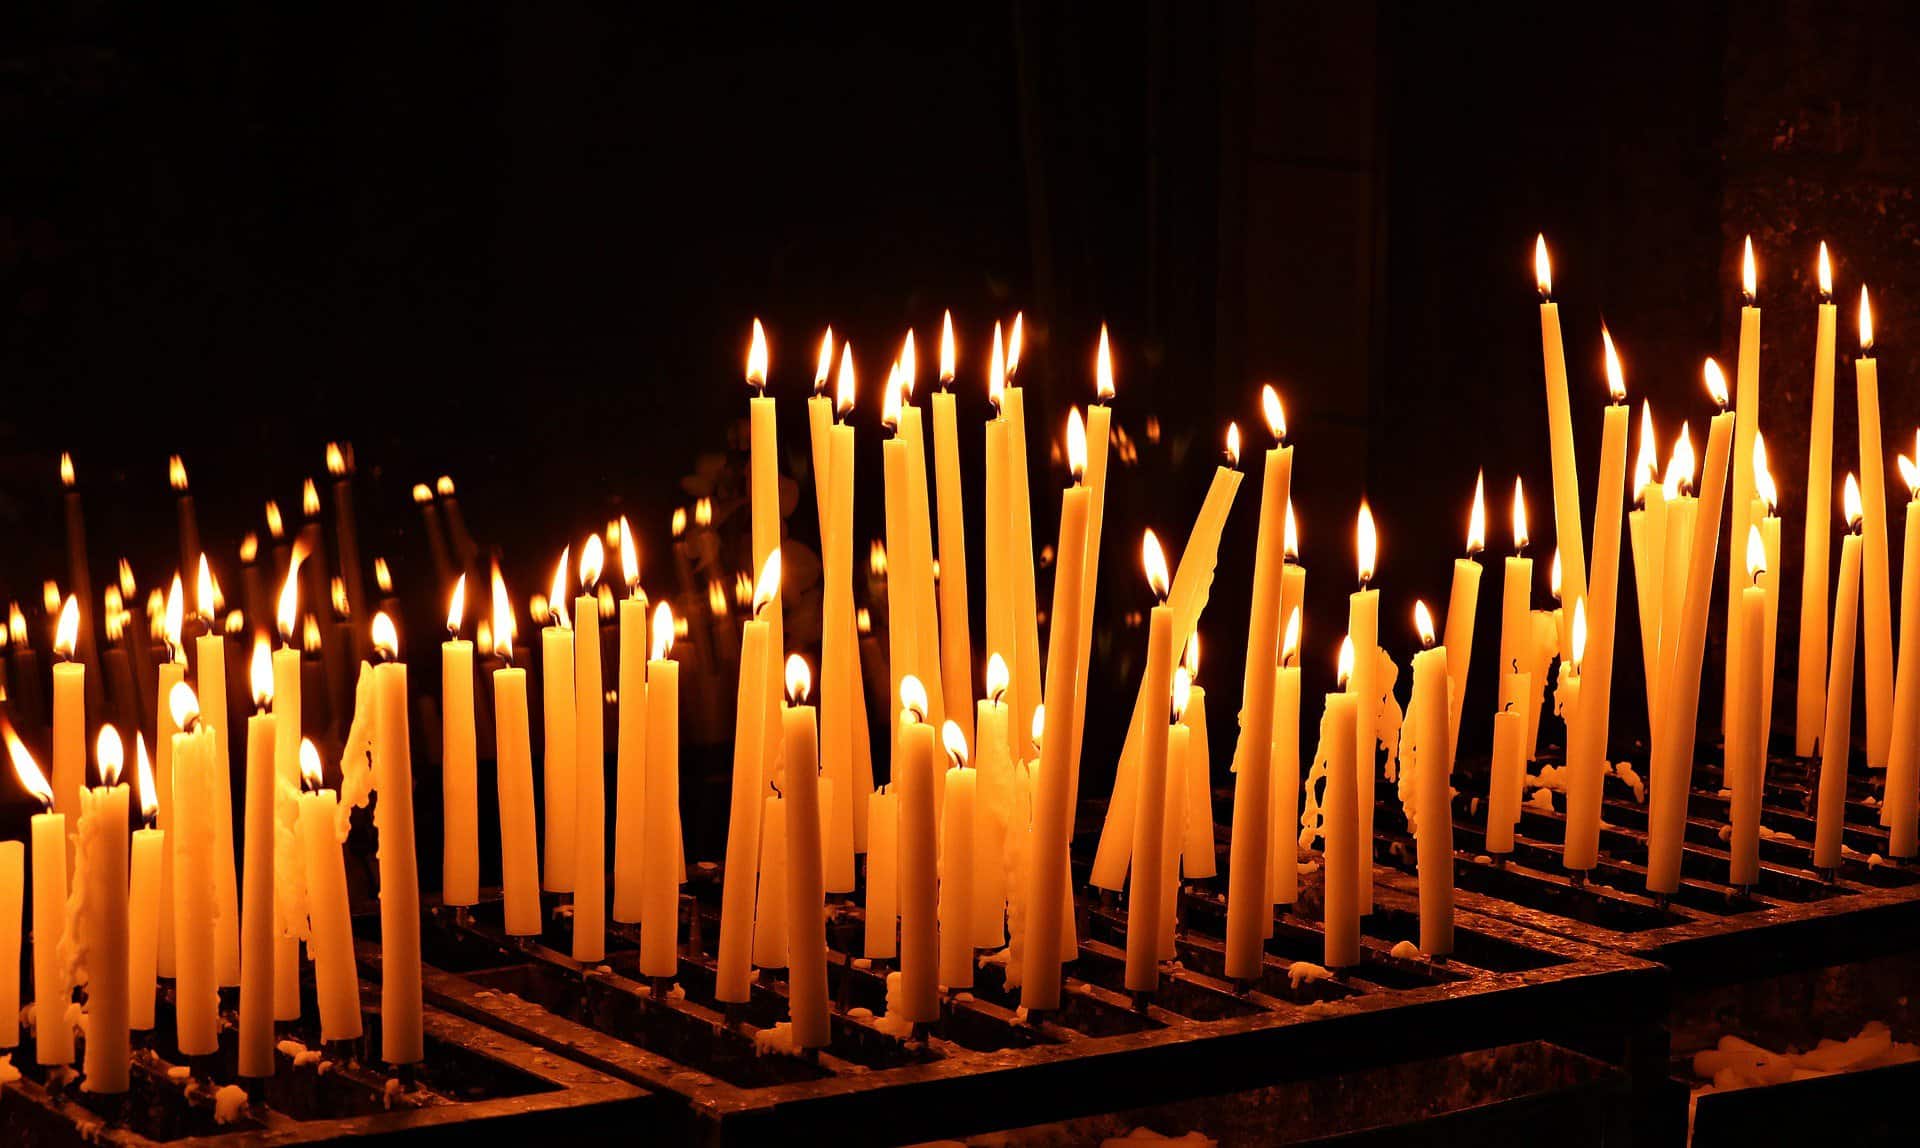 Many lit, orange tapered candles are shown clumped together.